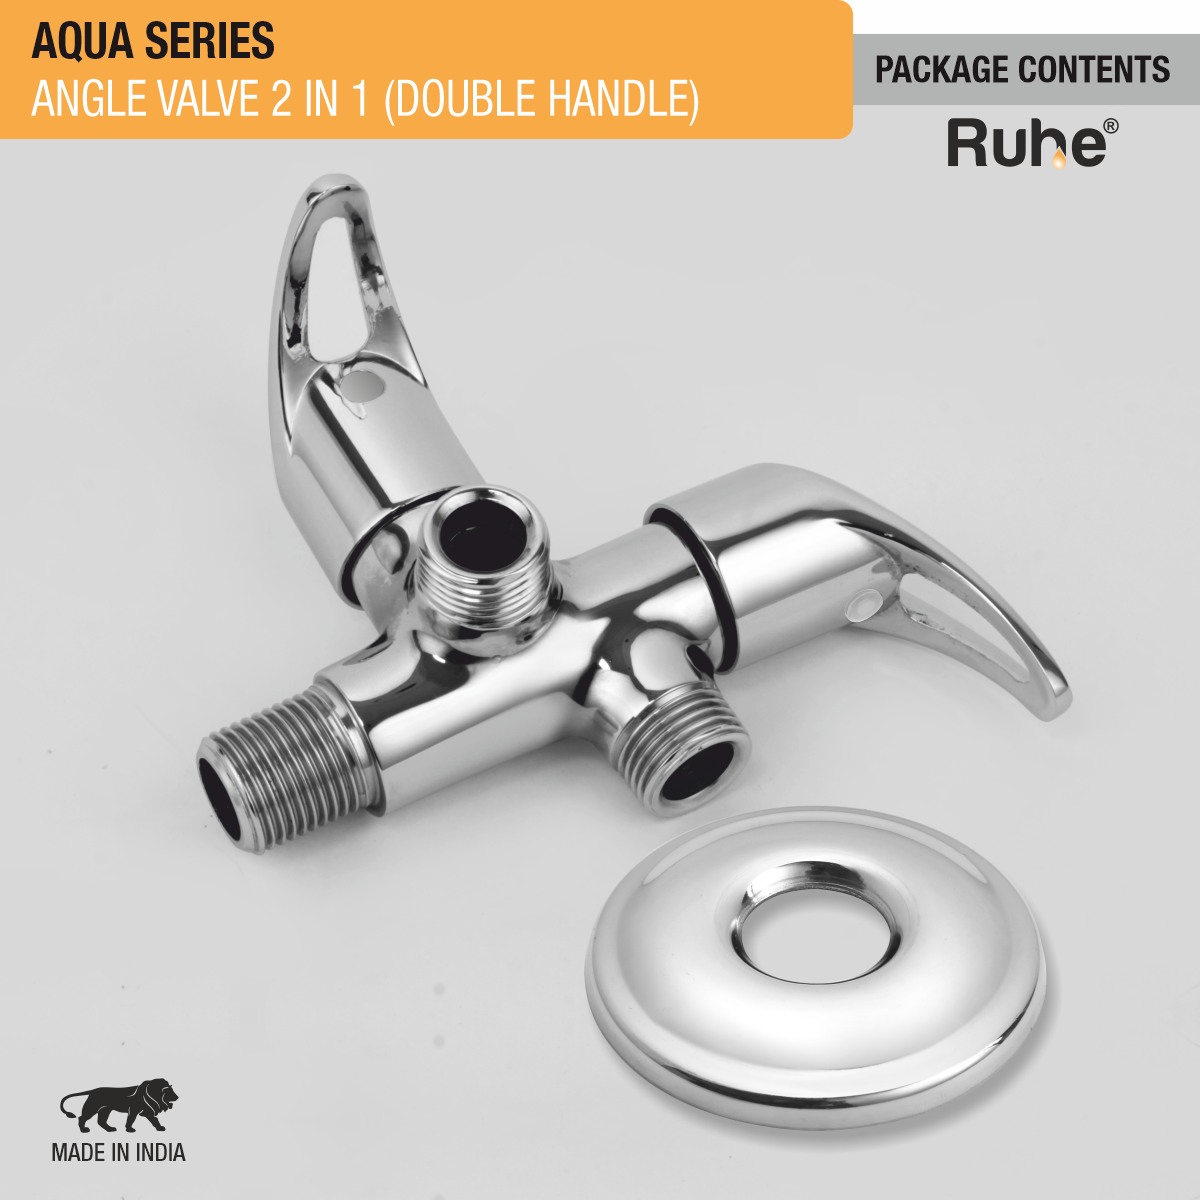 Aqua Two Way Angle Valve Brass Faucet (Double Handle) package content